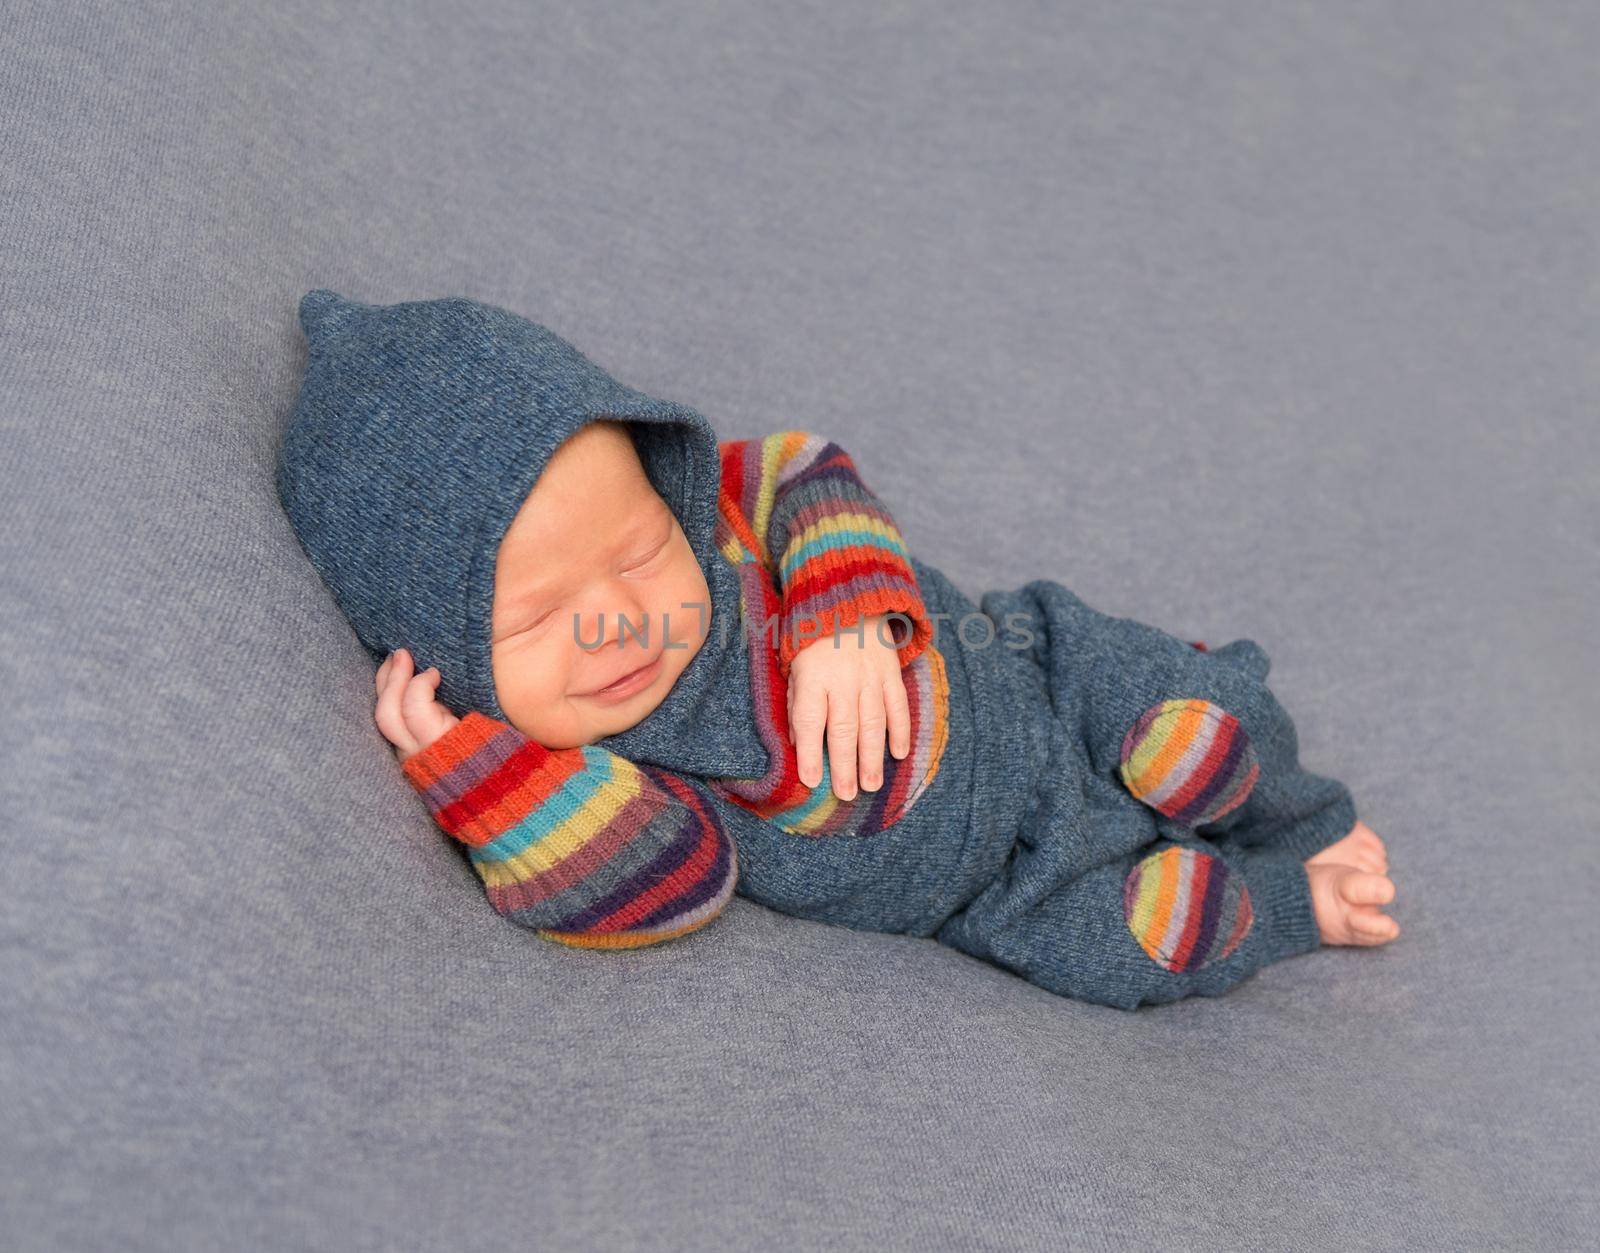 Frowning aborable kid in a bright outfit with his hand under his head, sleeping